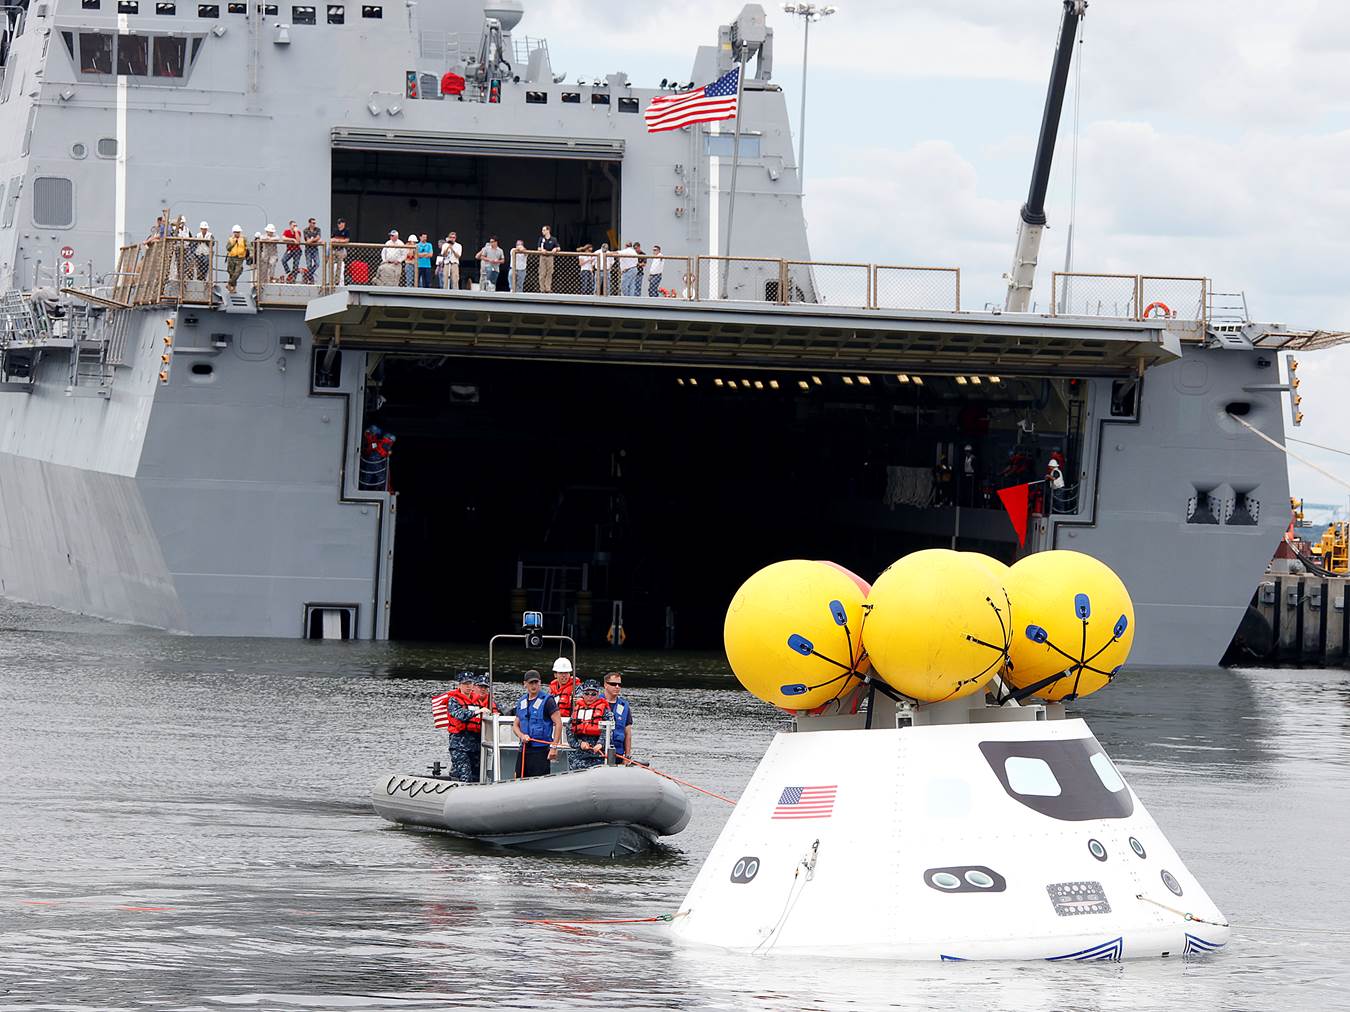 NASA image recovery Orion spacecraft posted on AmericaSpace